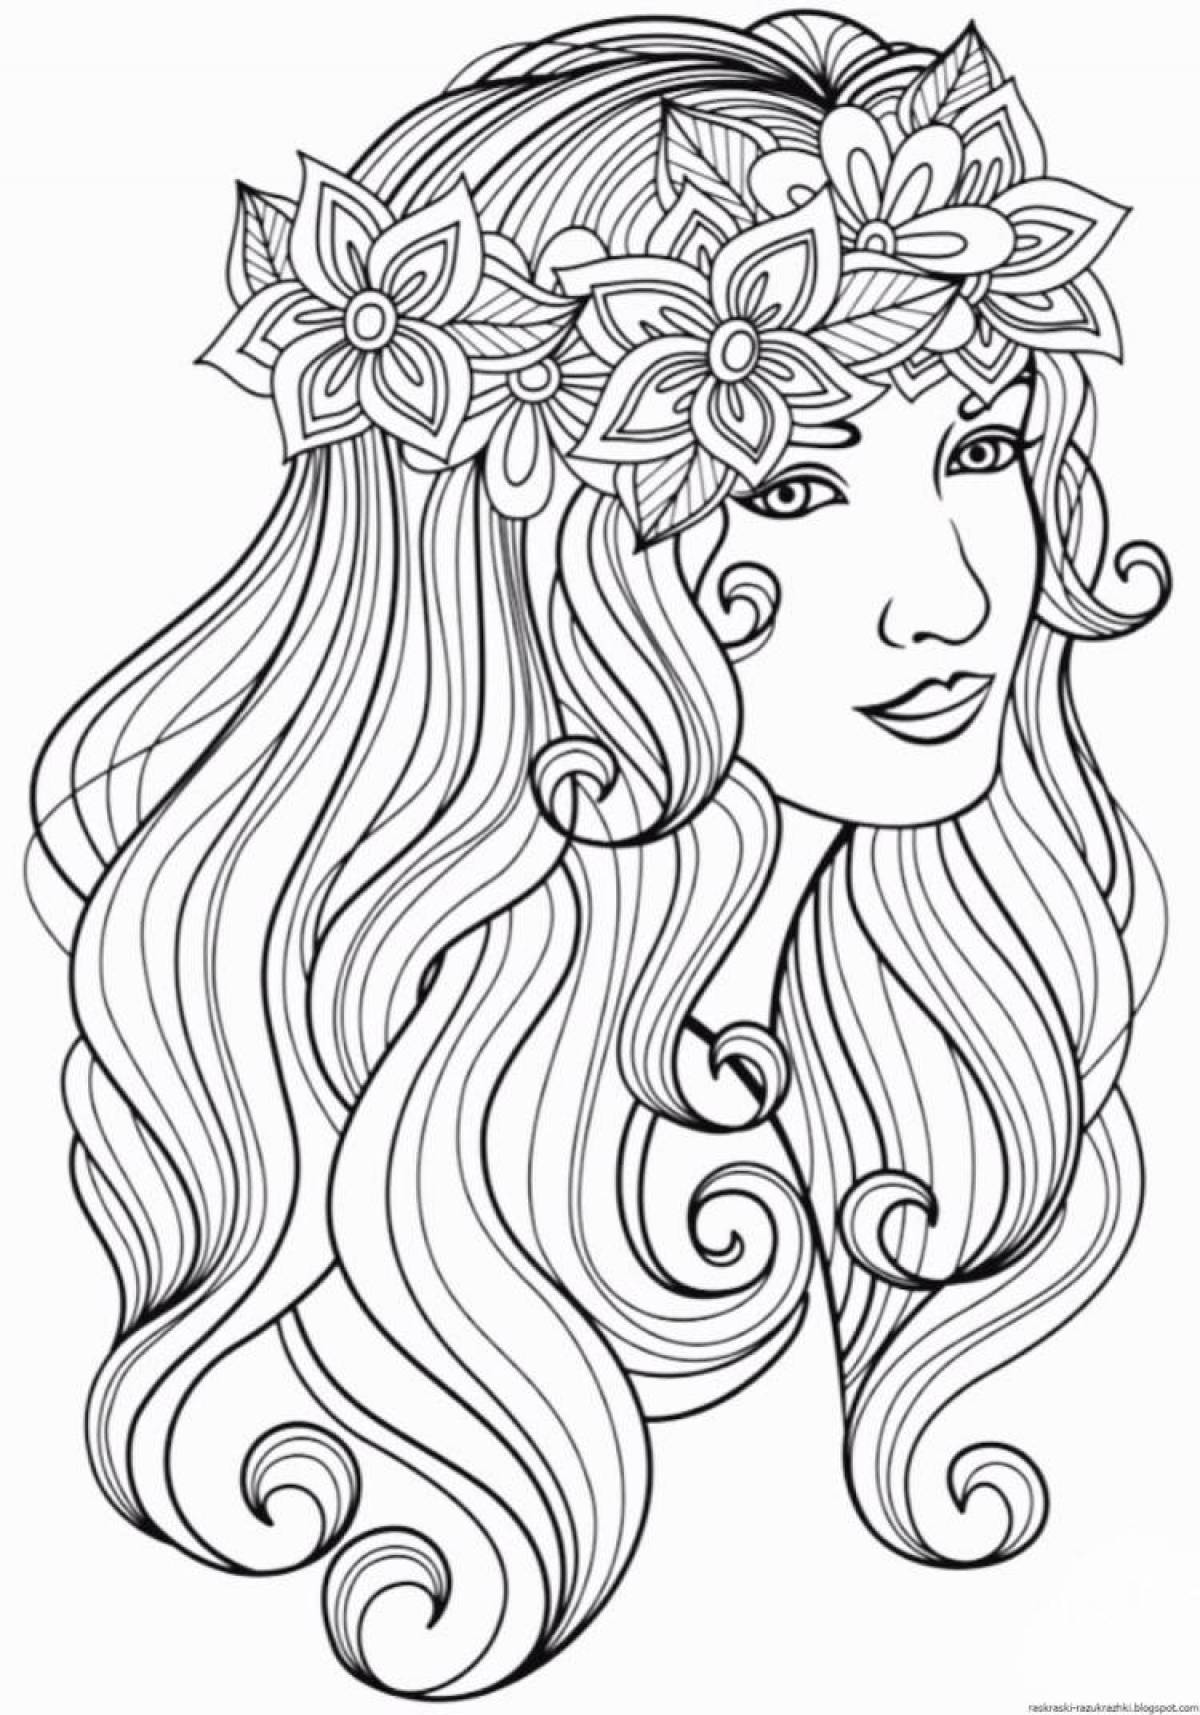 Dazzling hair coloring page